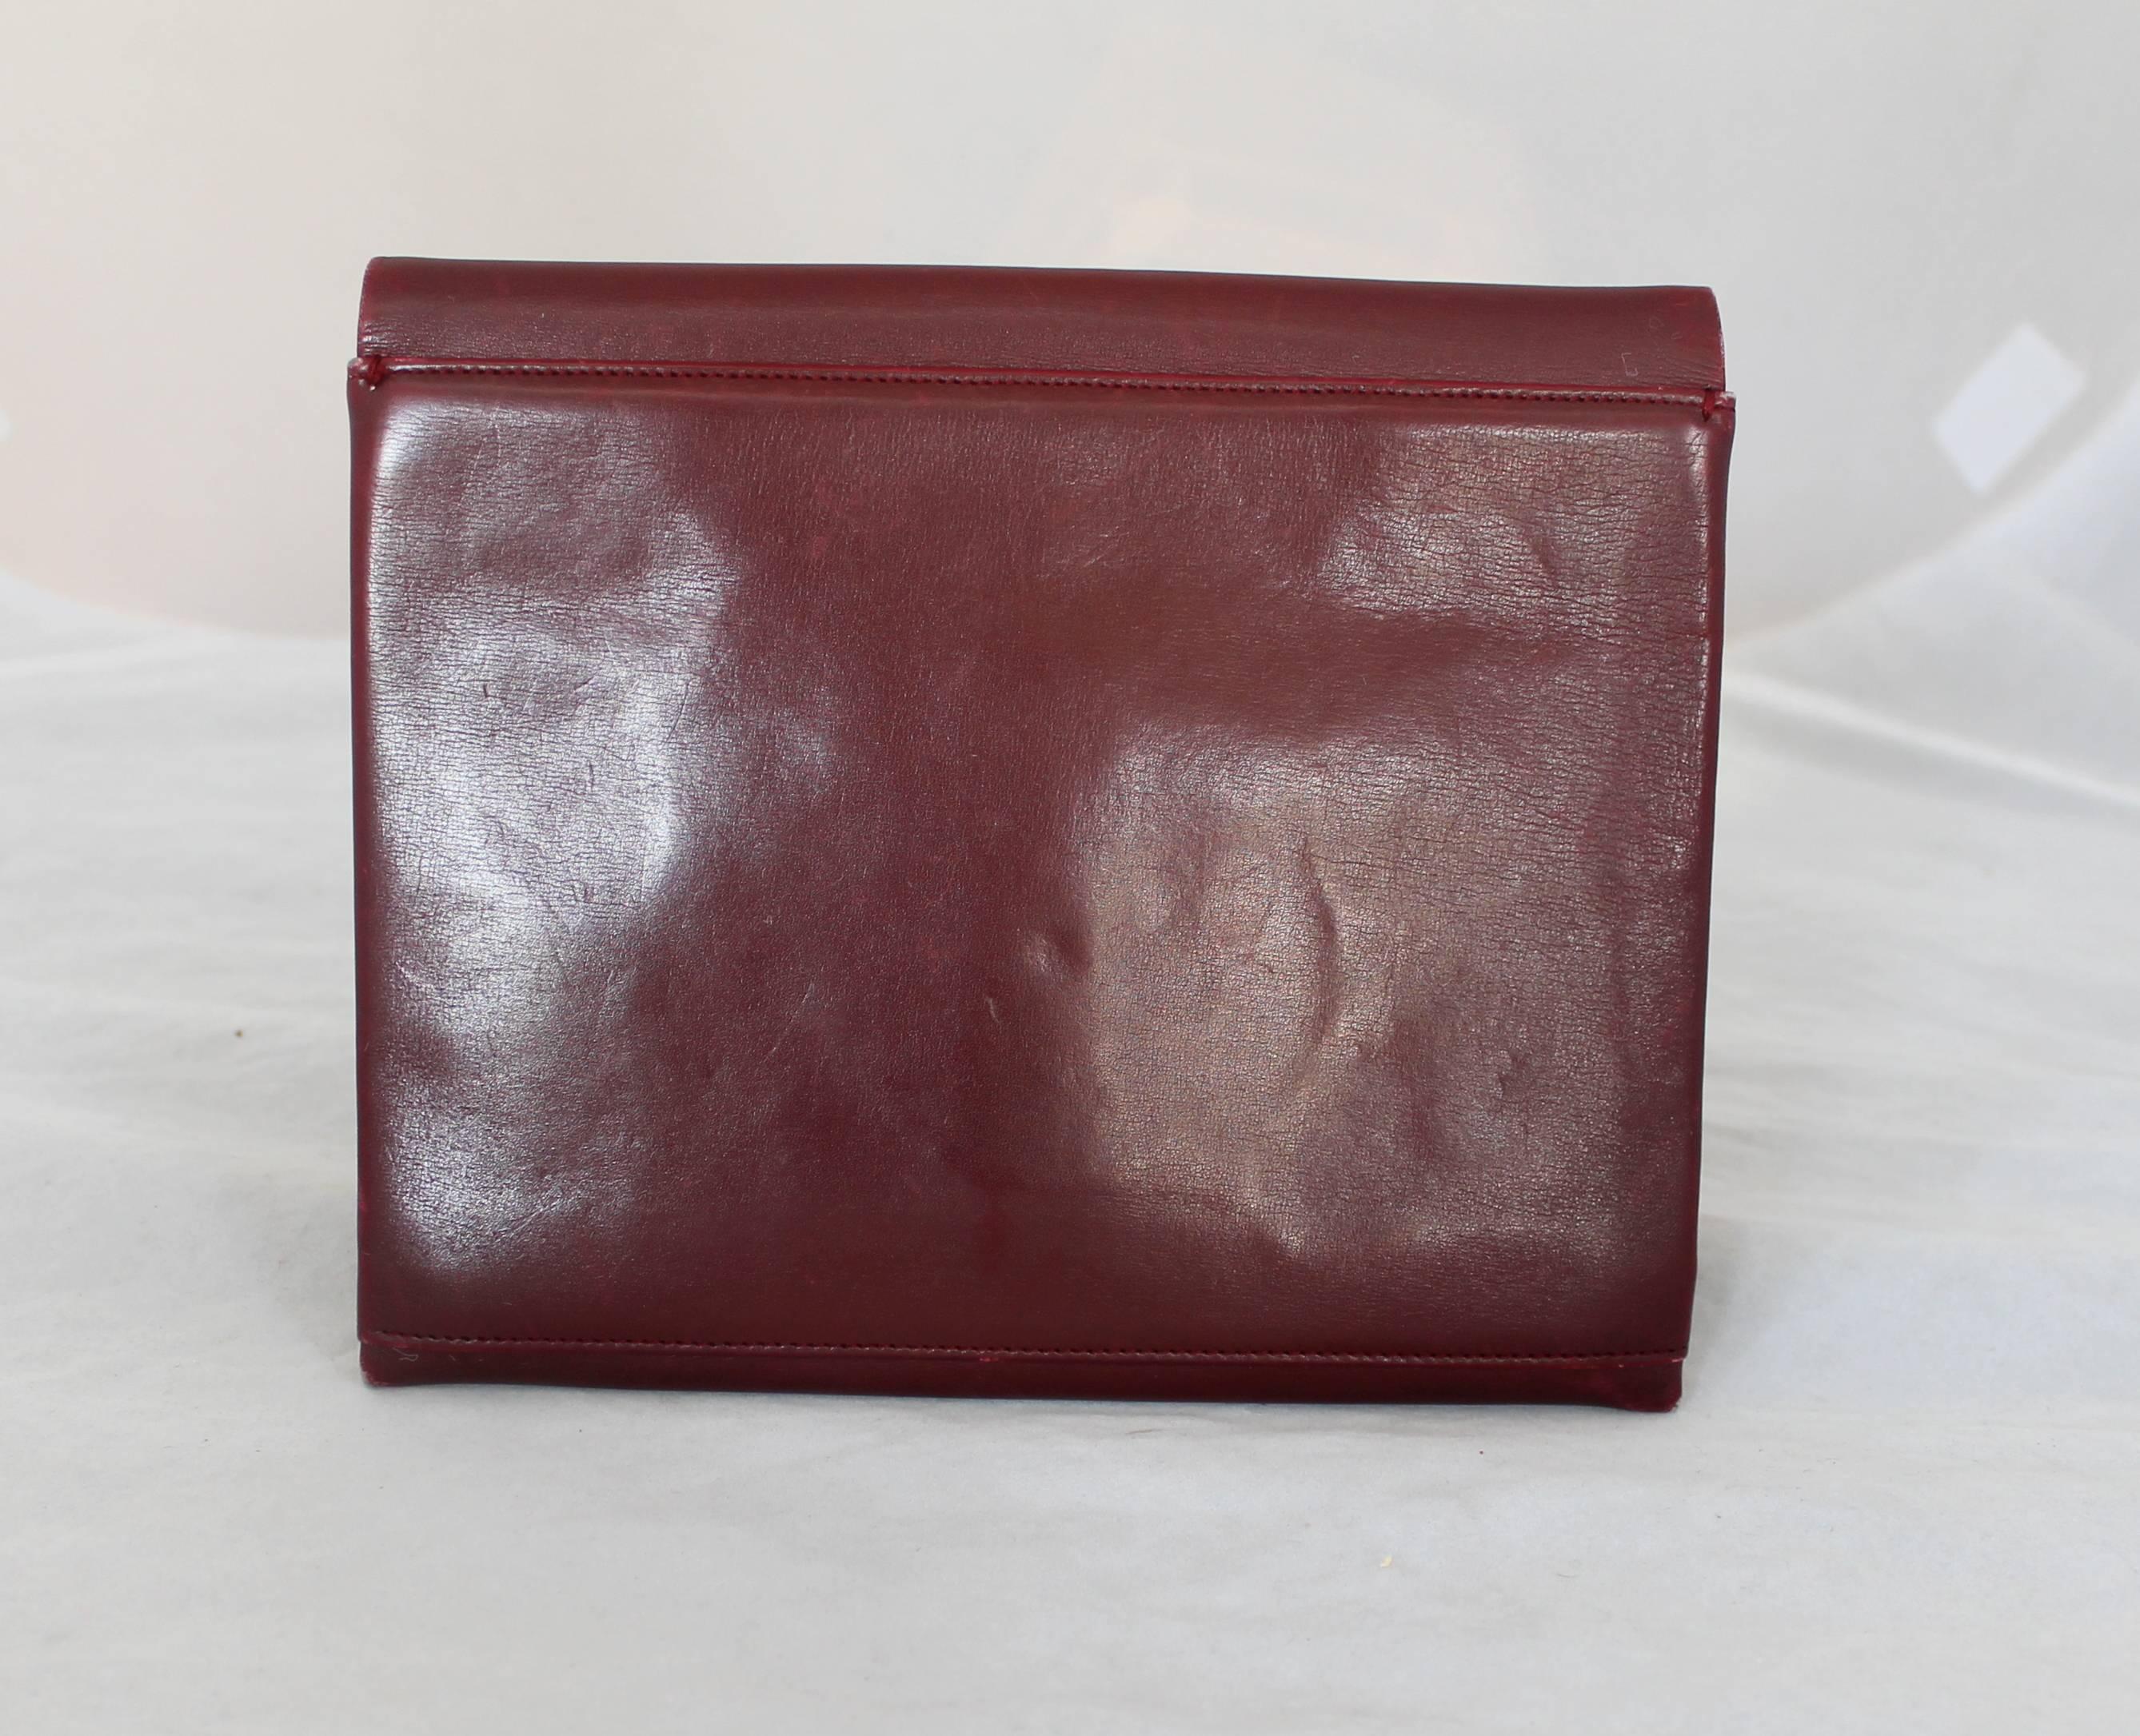 Christian Dior Vintage Burgundy Leather Clutch with Bow - circa 1990's. This bag is in fair good vintage condition with some scratches in the front and back of the bag. The piece has a red lining and a square shape. 

Measurements:
Height-